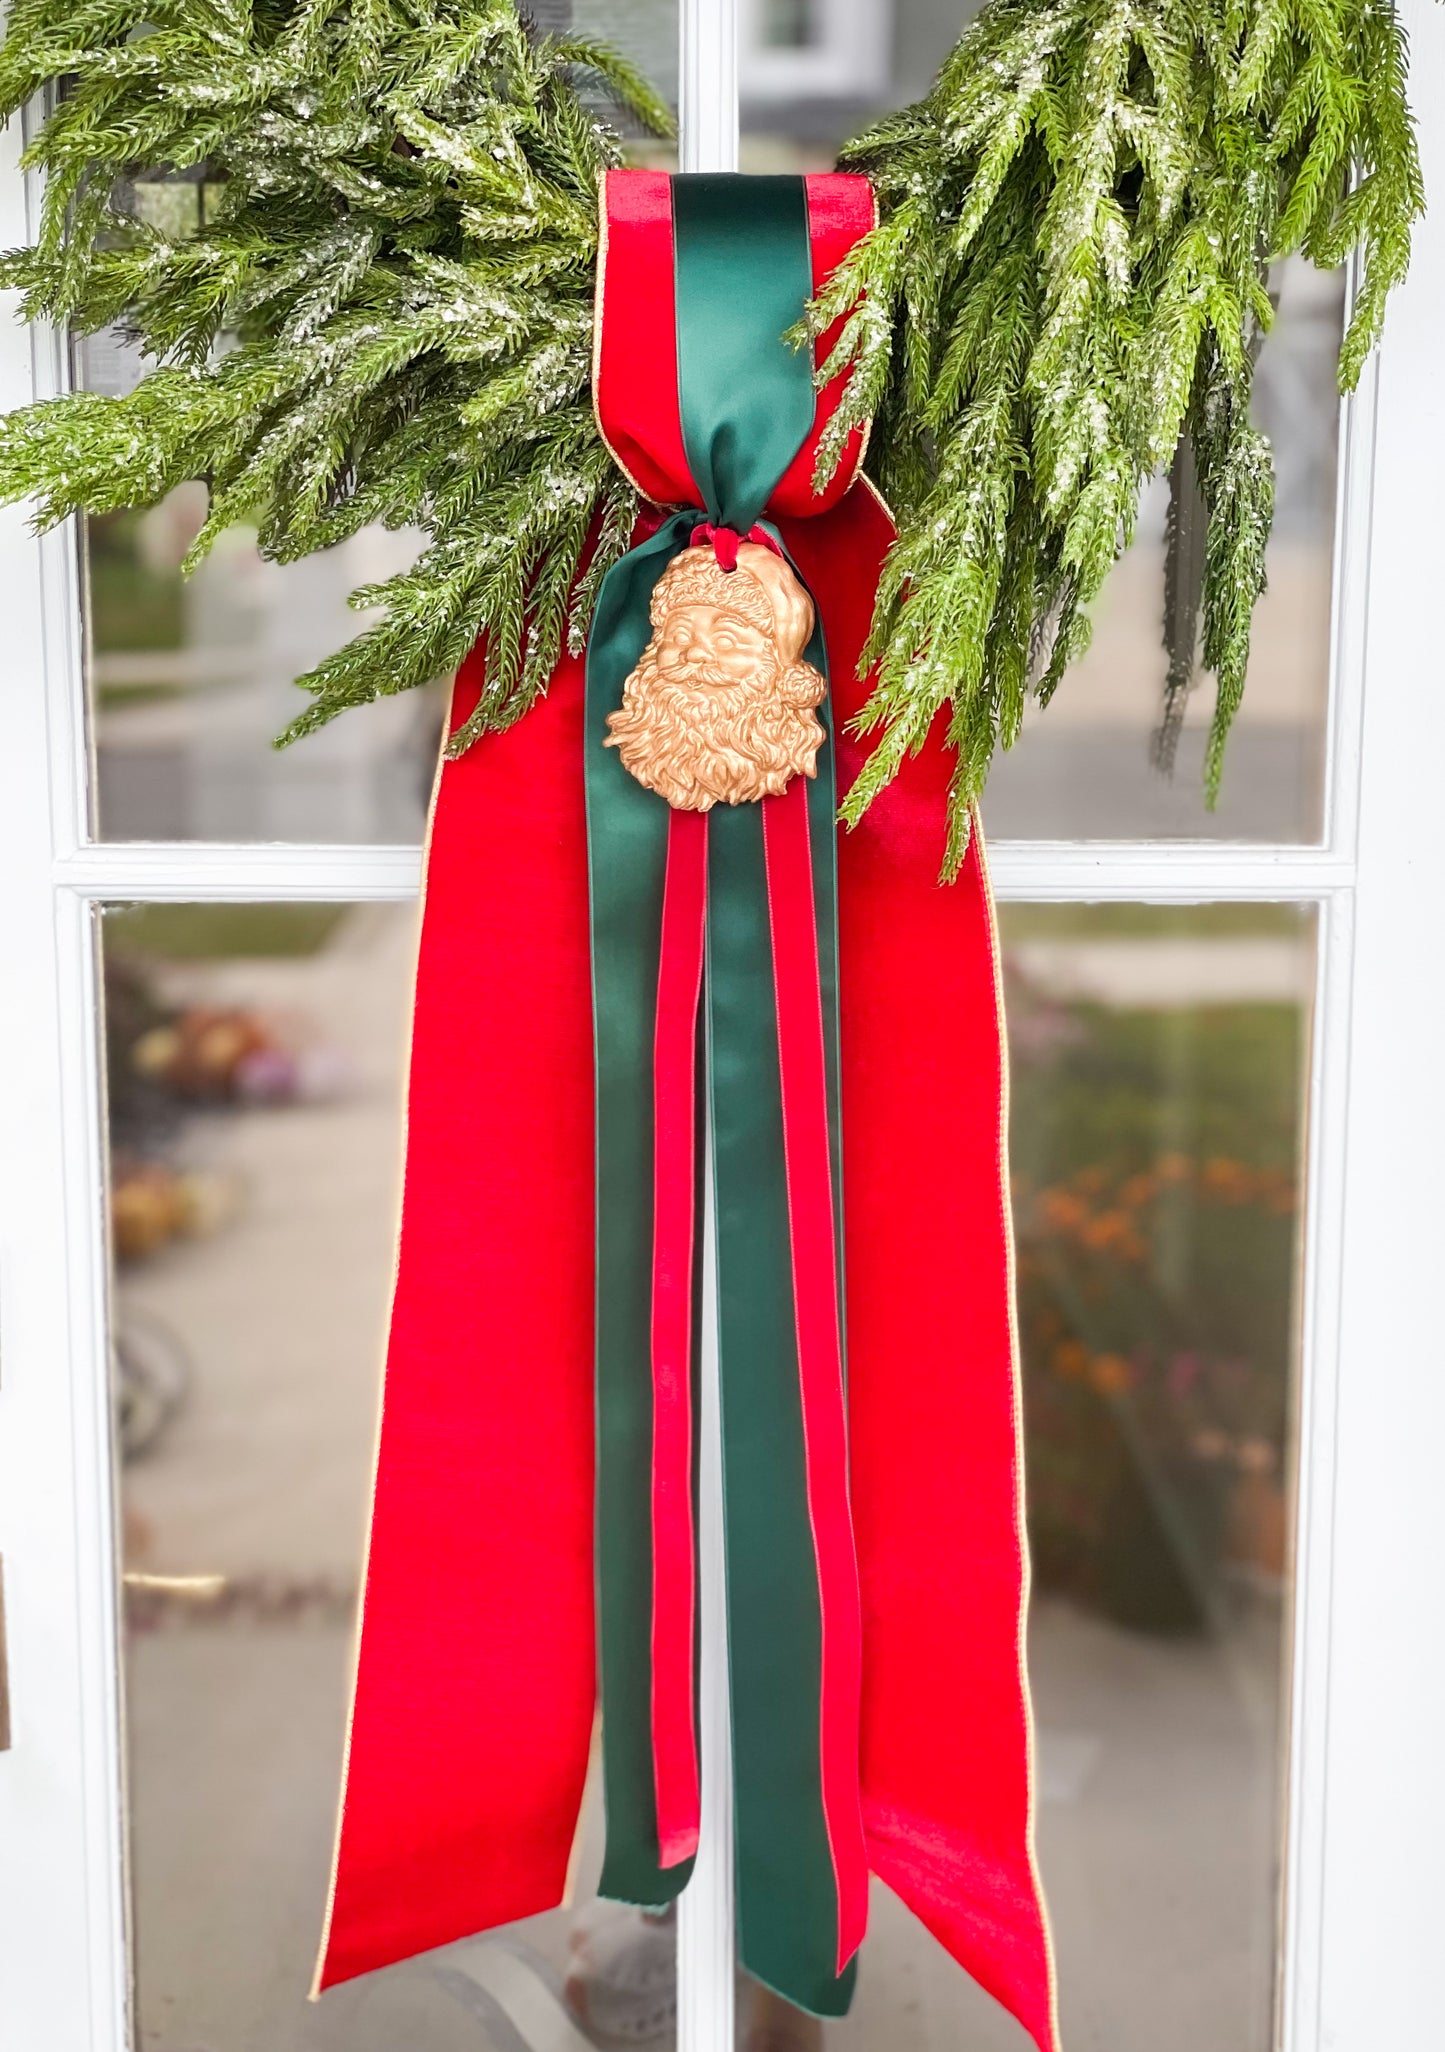 The Red Believe Iced Fir Pine Wreath With Sash And Santa